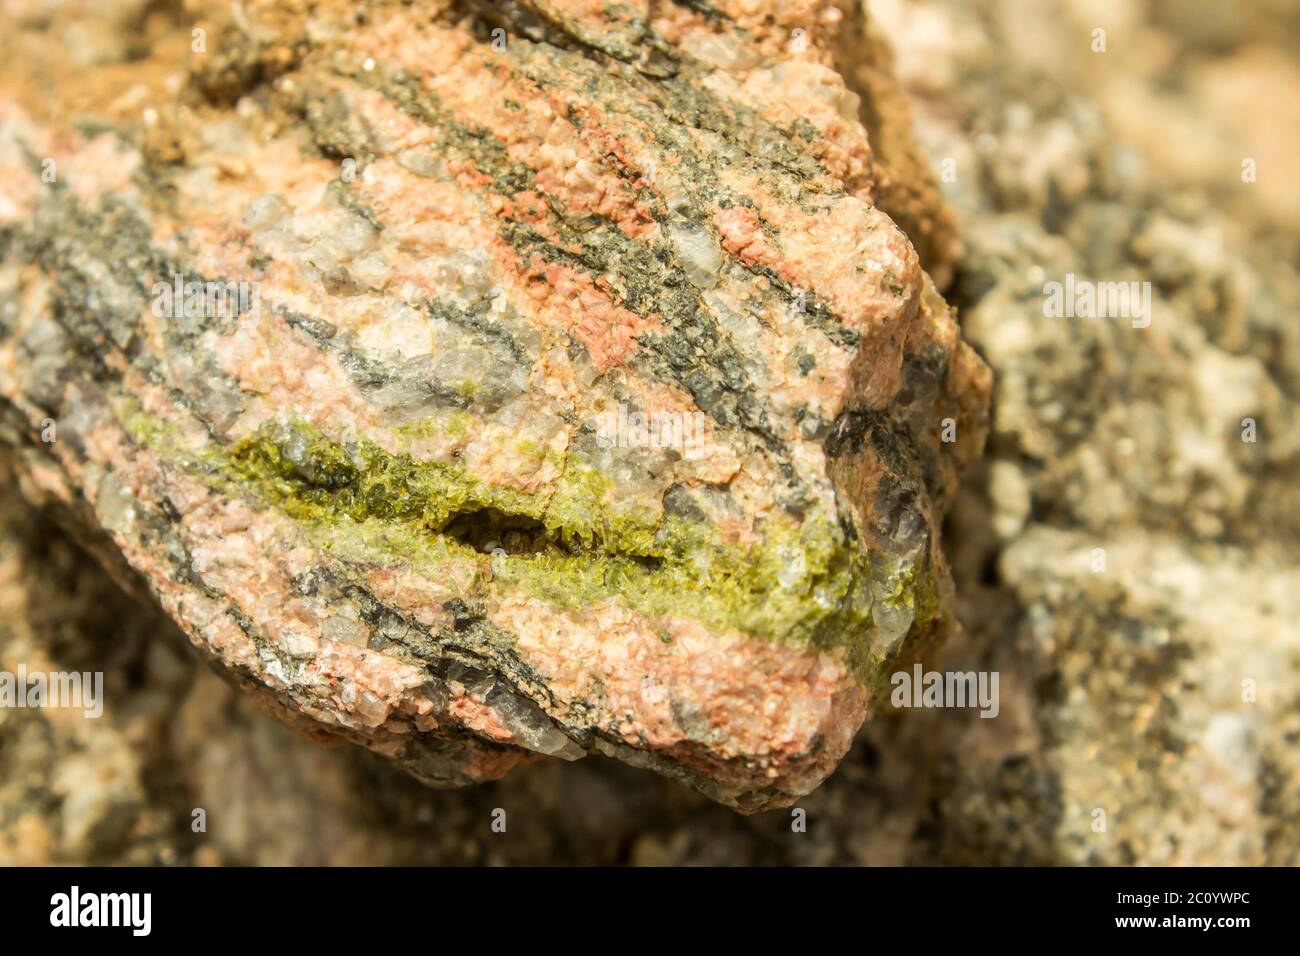 Epidote crystals growing in a crack in weathered boulder of Augen gneiss Stock Photo